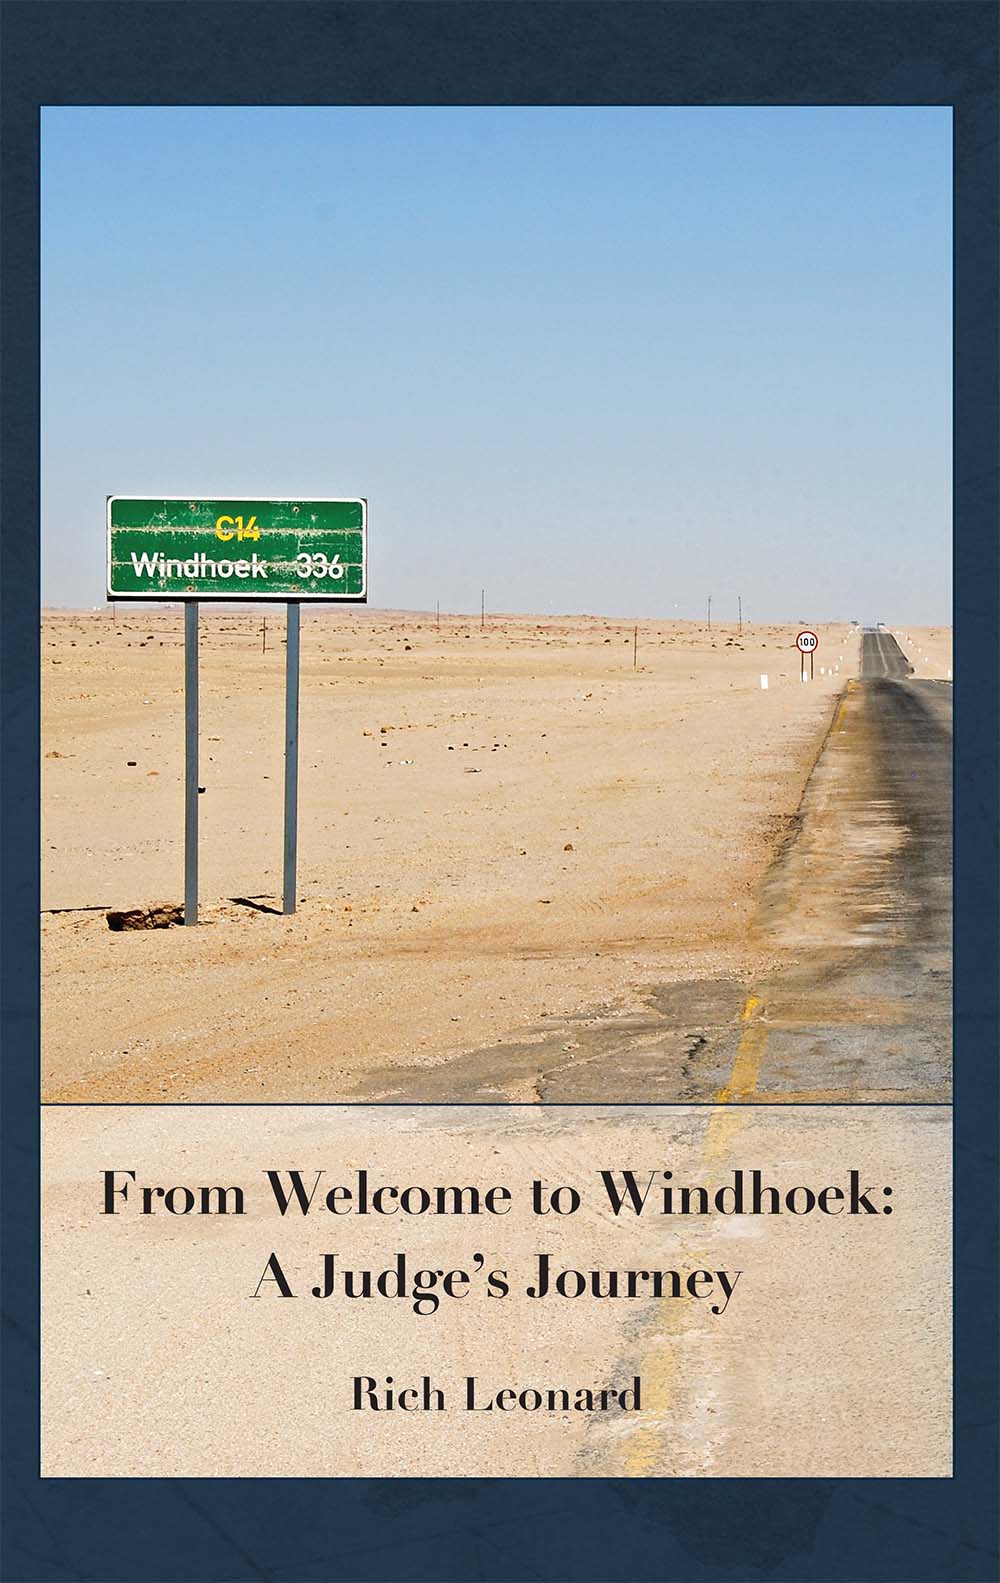 from-welcome-to-windhoek (1)